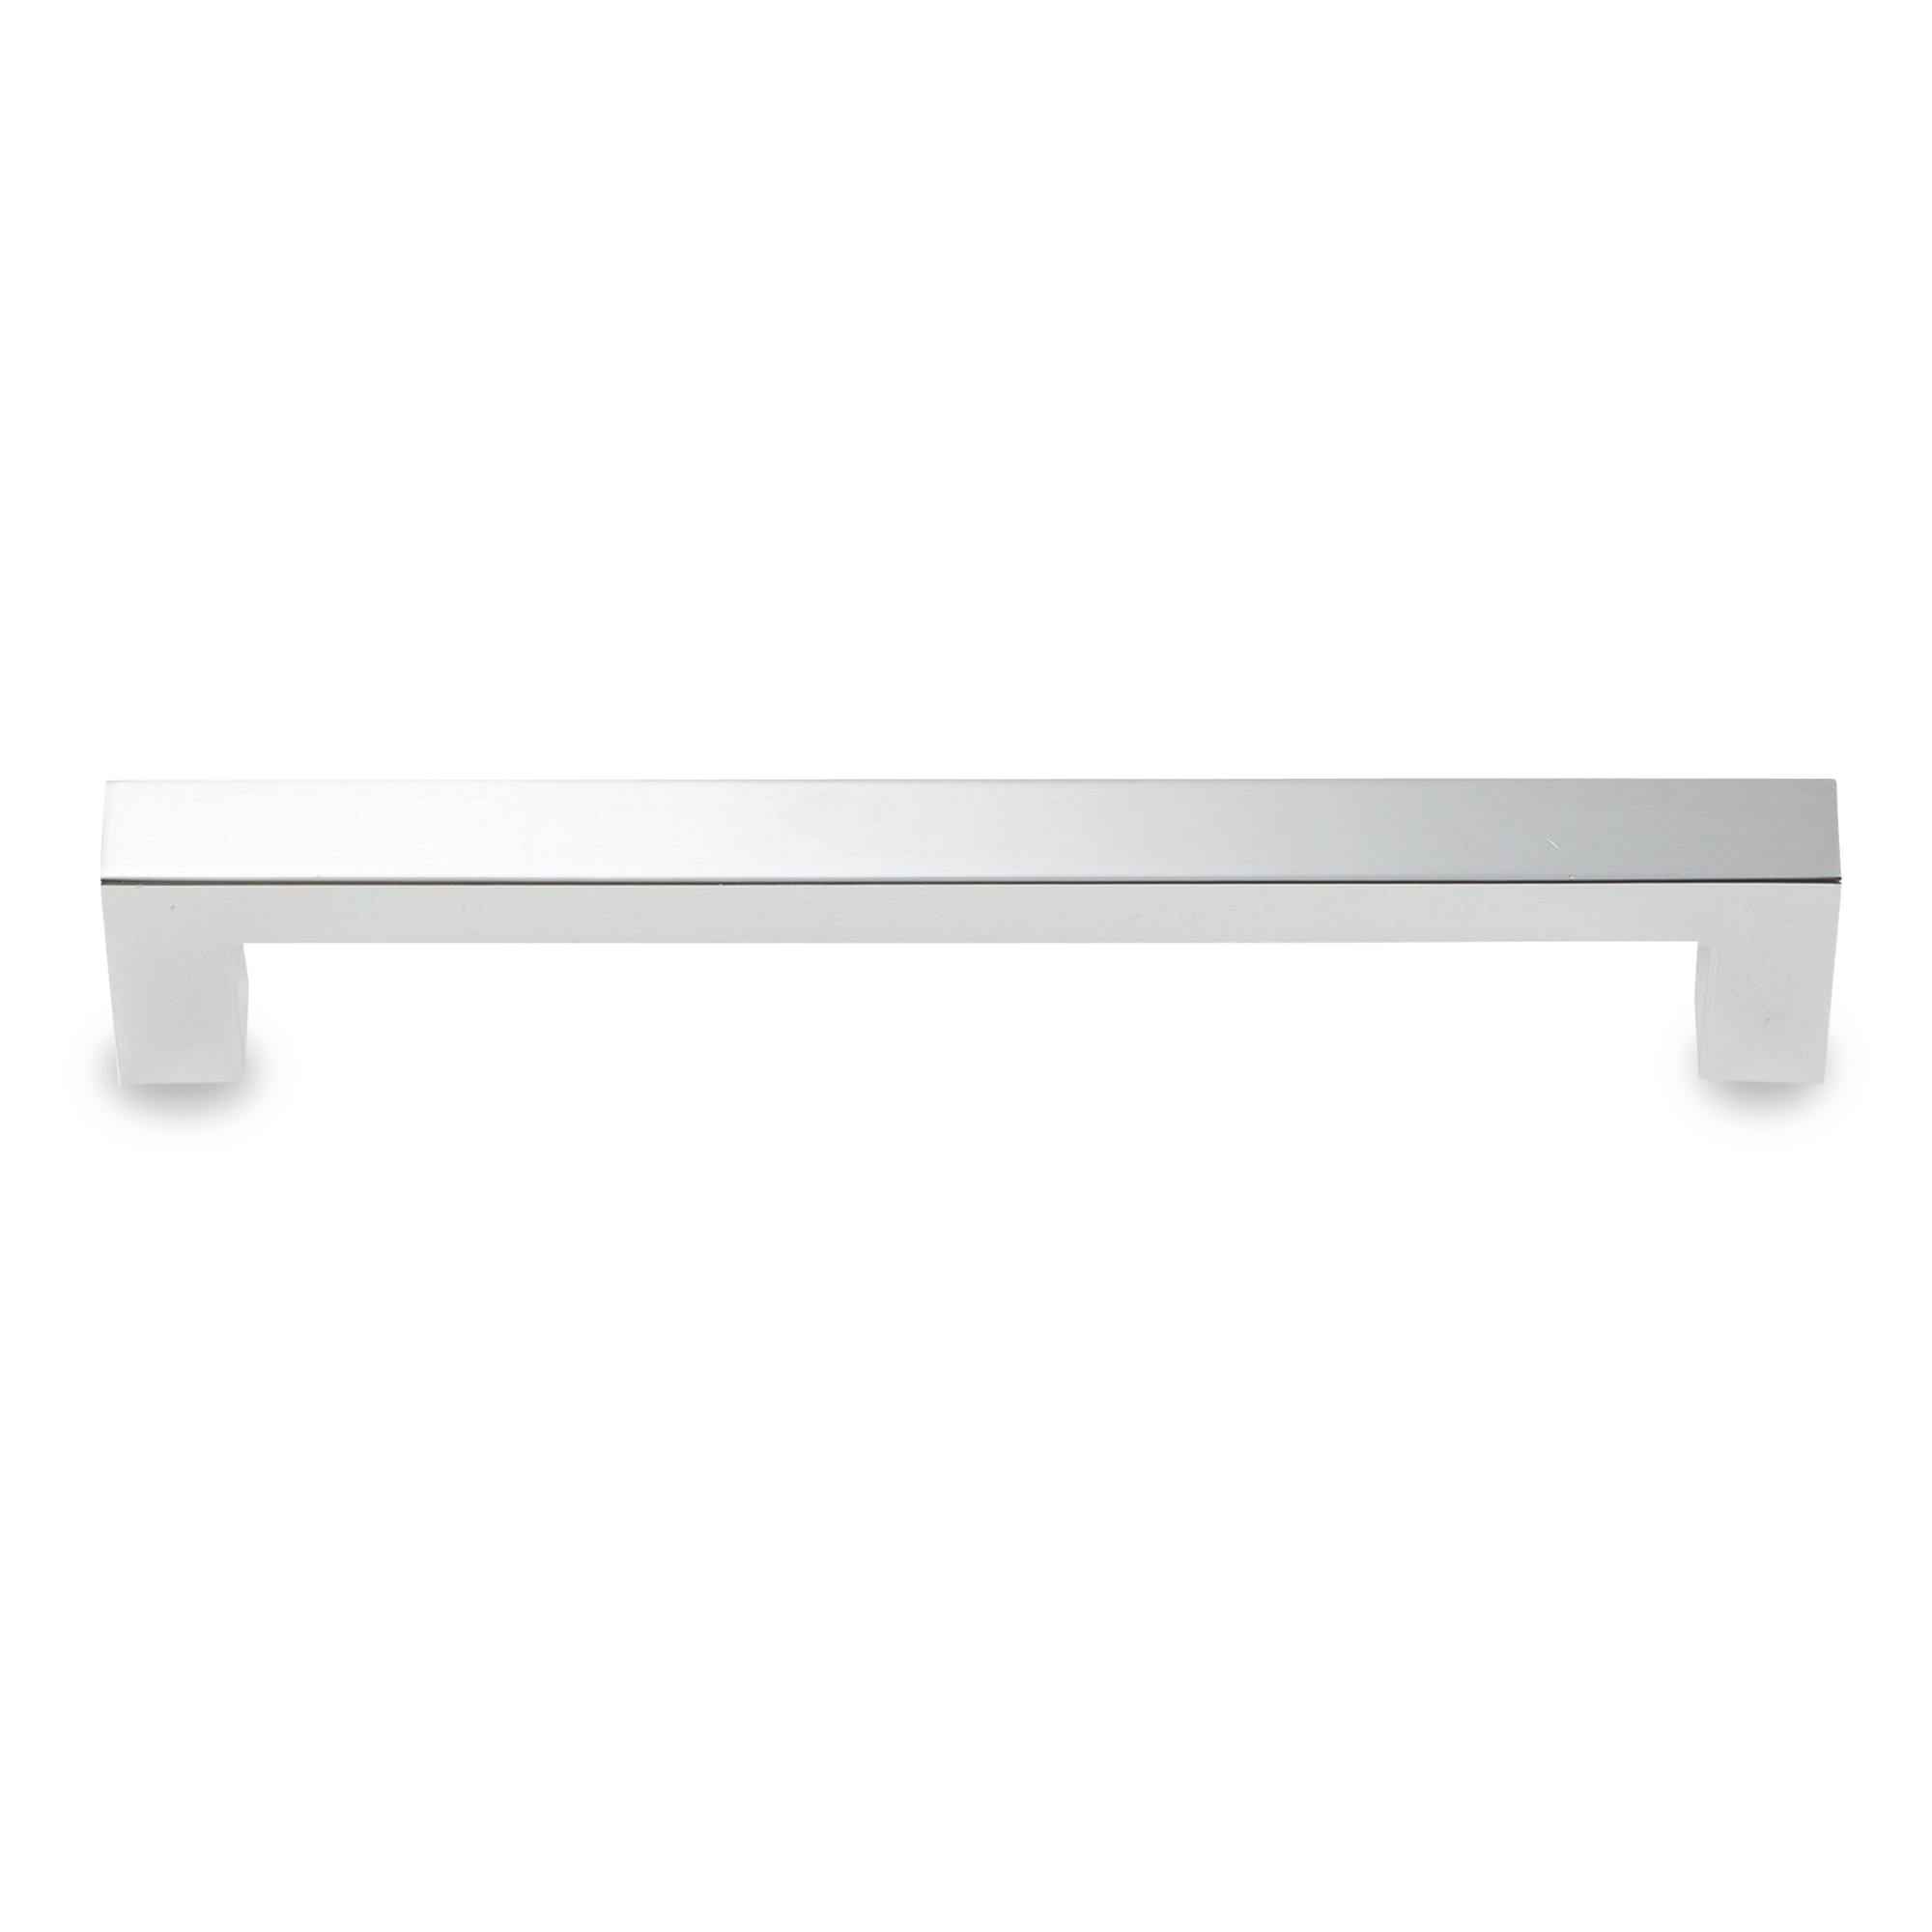 A simple flat rectangular pull with a seamless and modern design.